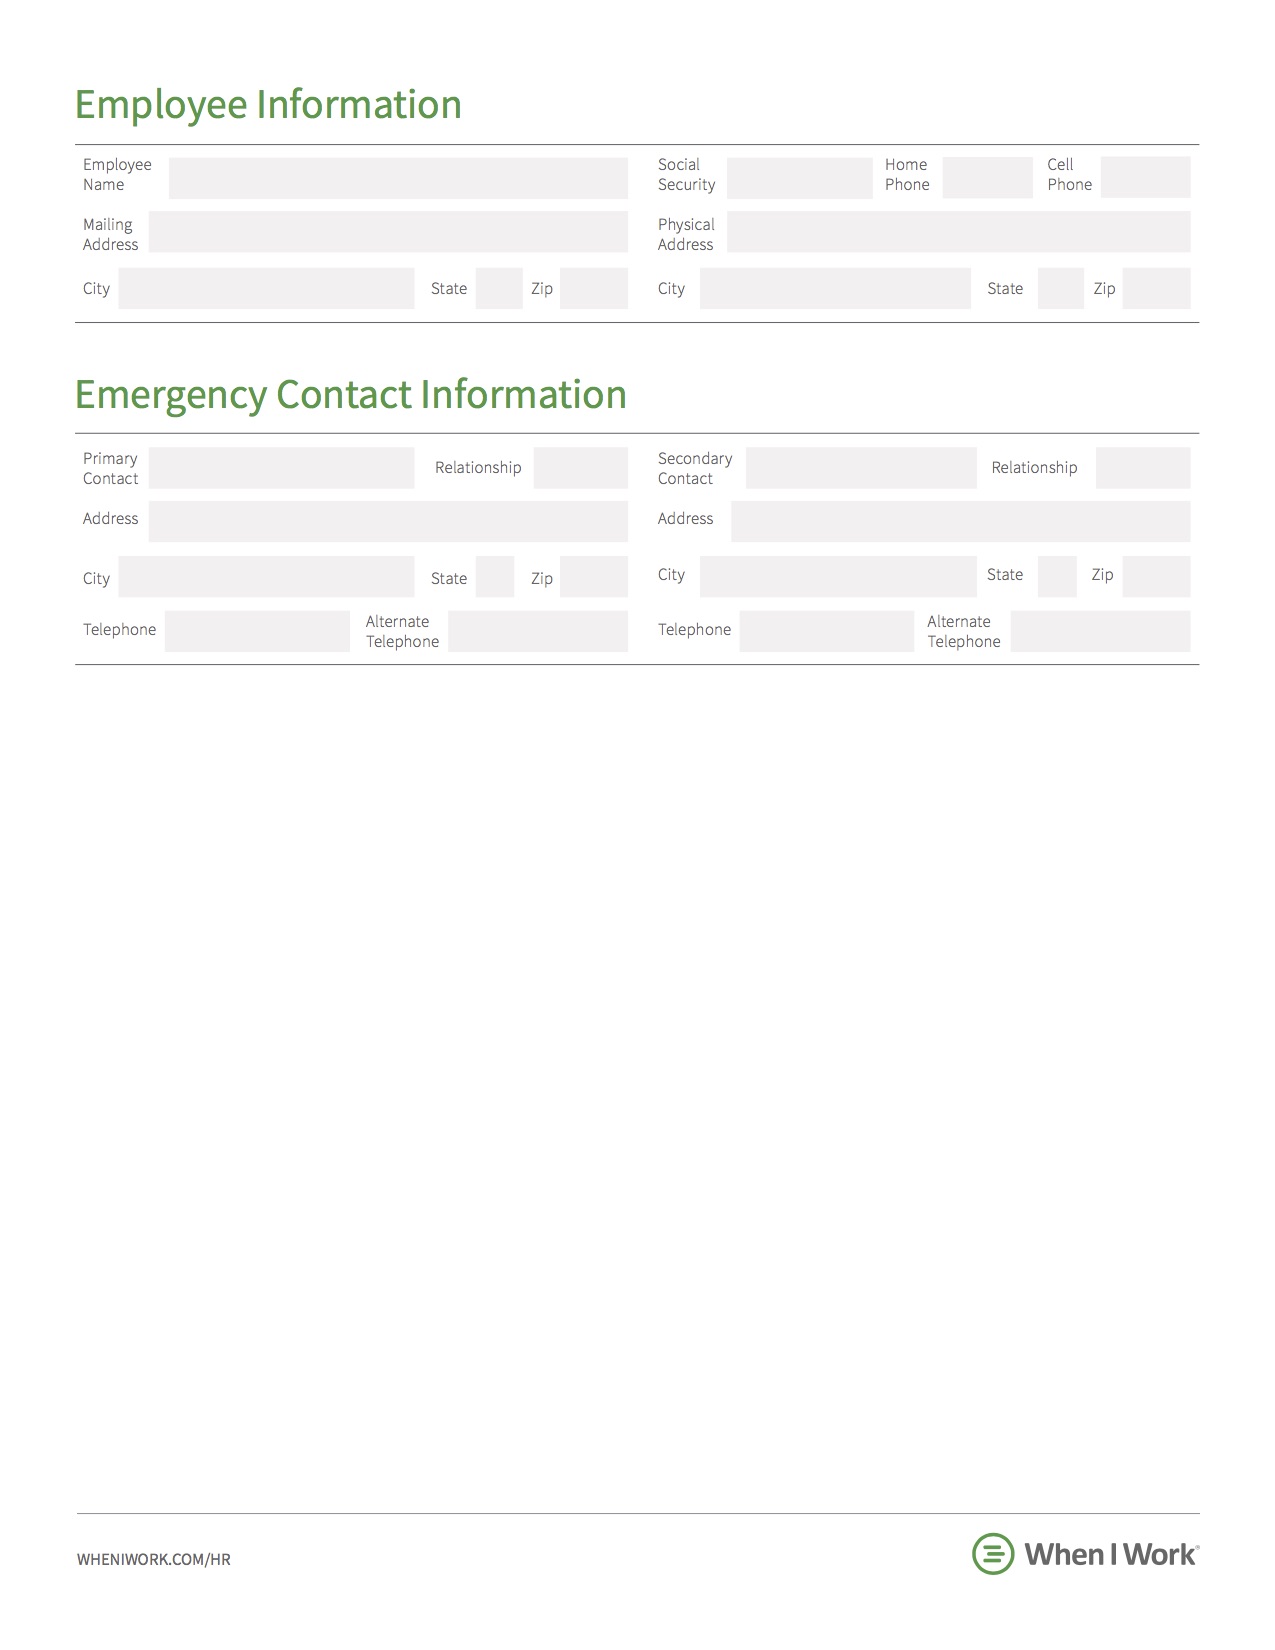 Employment Information Form Template from marketing-assets.wheniwork-production.com